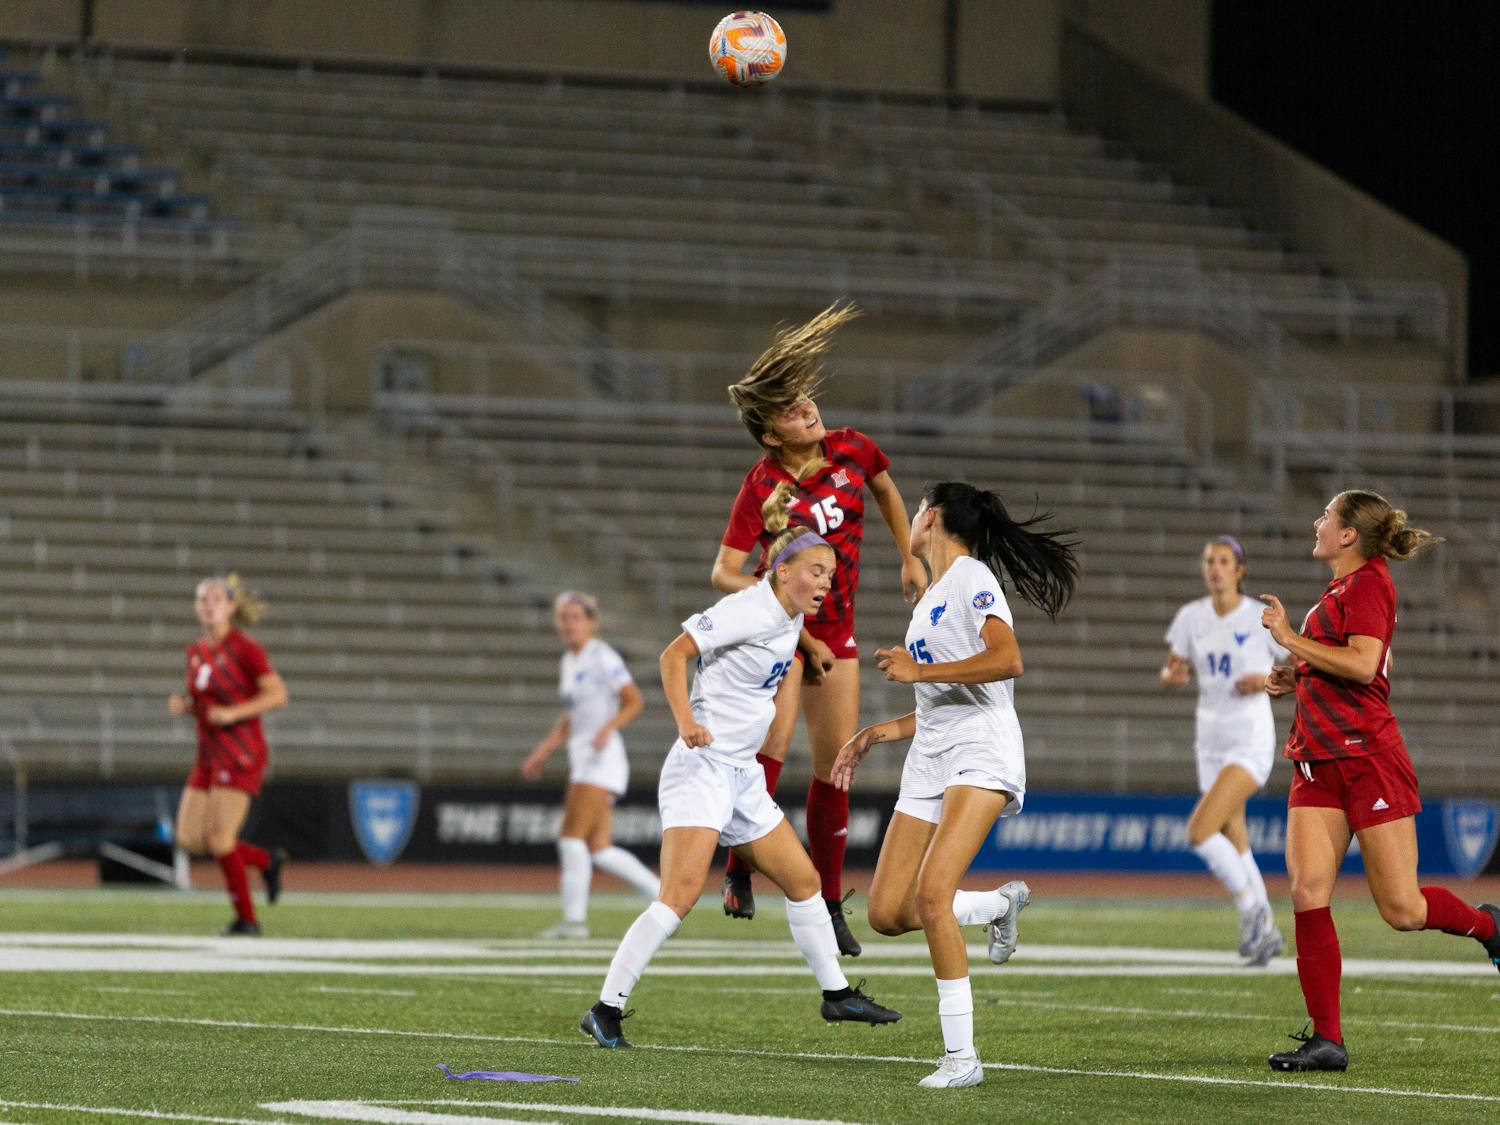 Katie Krohn scored both goals in Thursday's game against Miami (pictured above), just one of several high-scoring games for the sophomore striker.&nbsp;